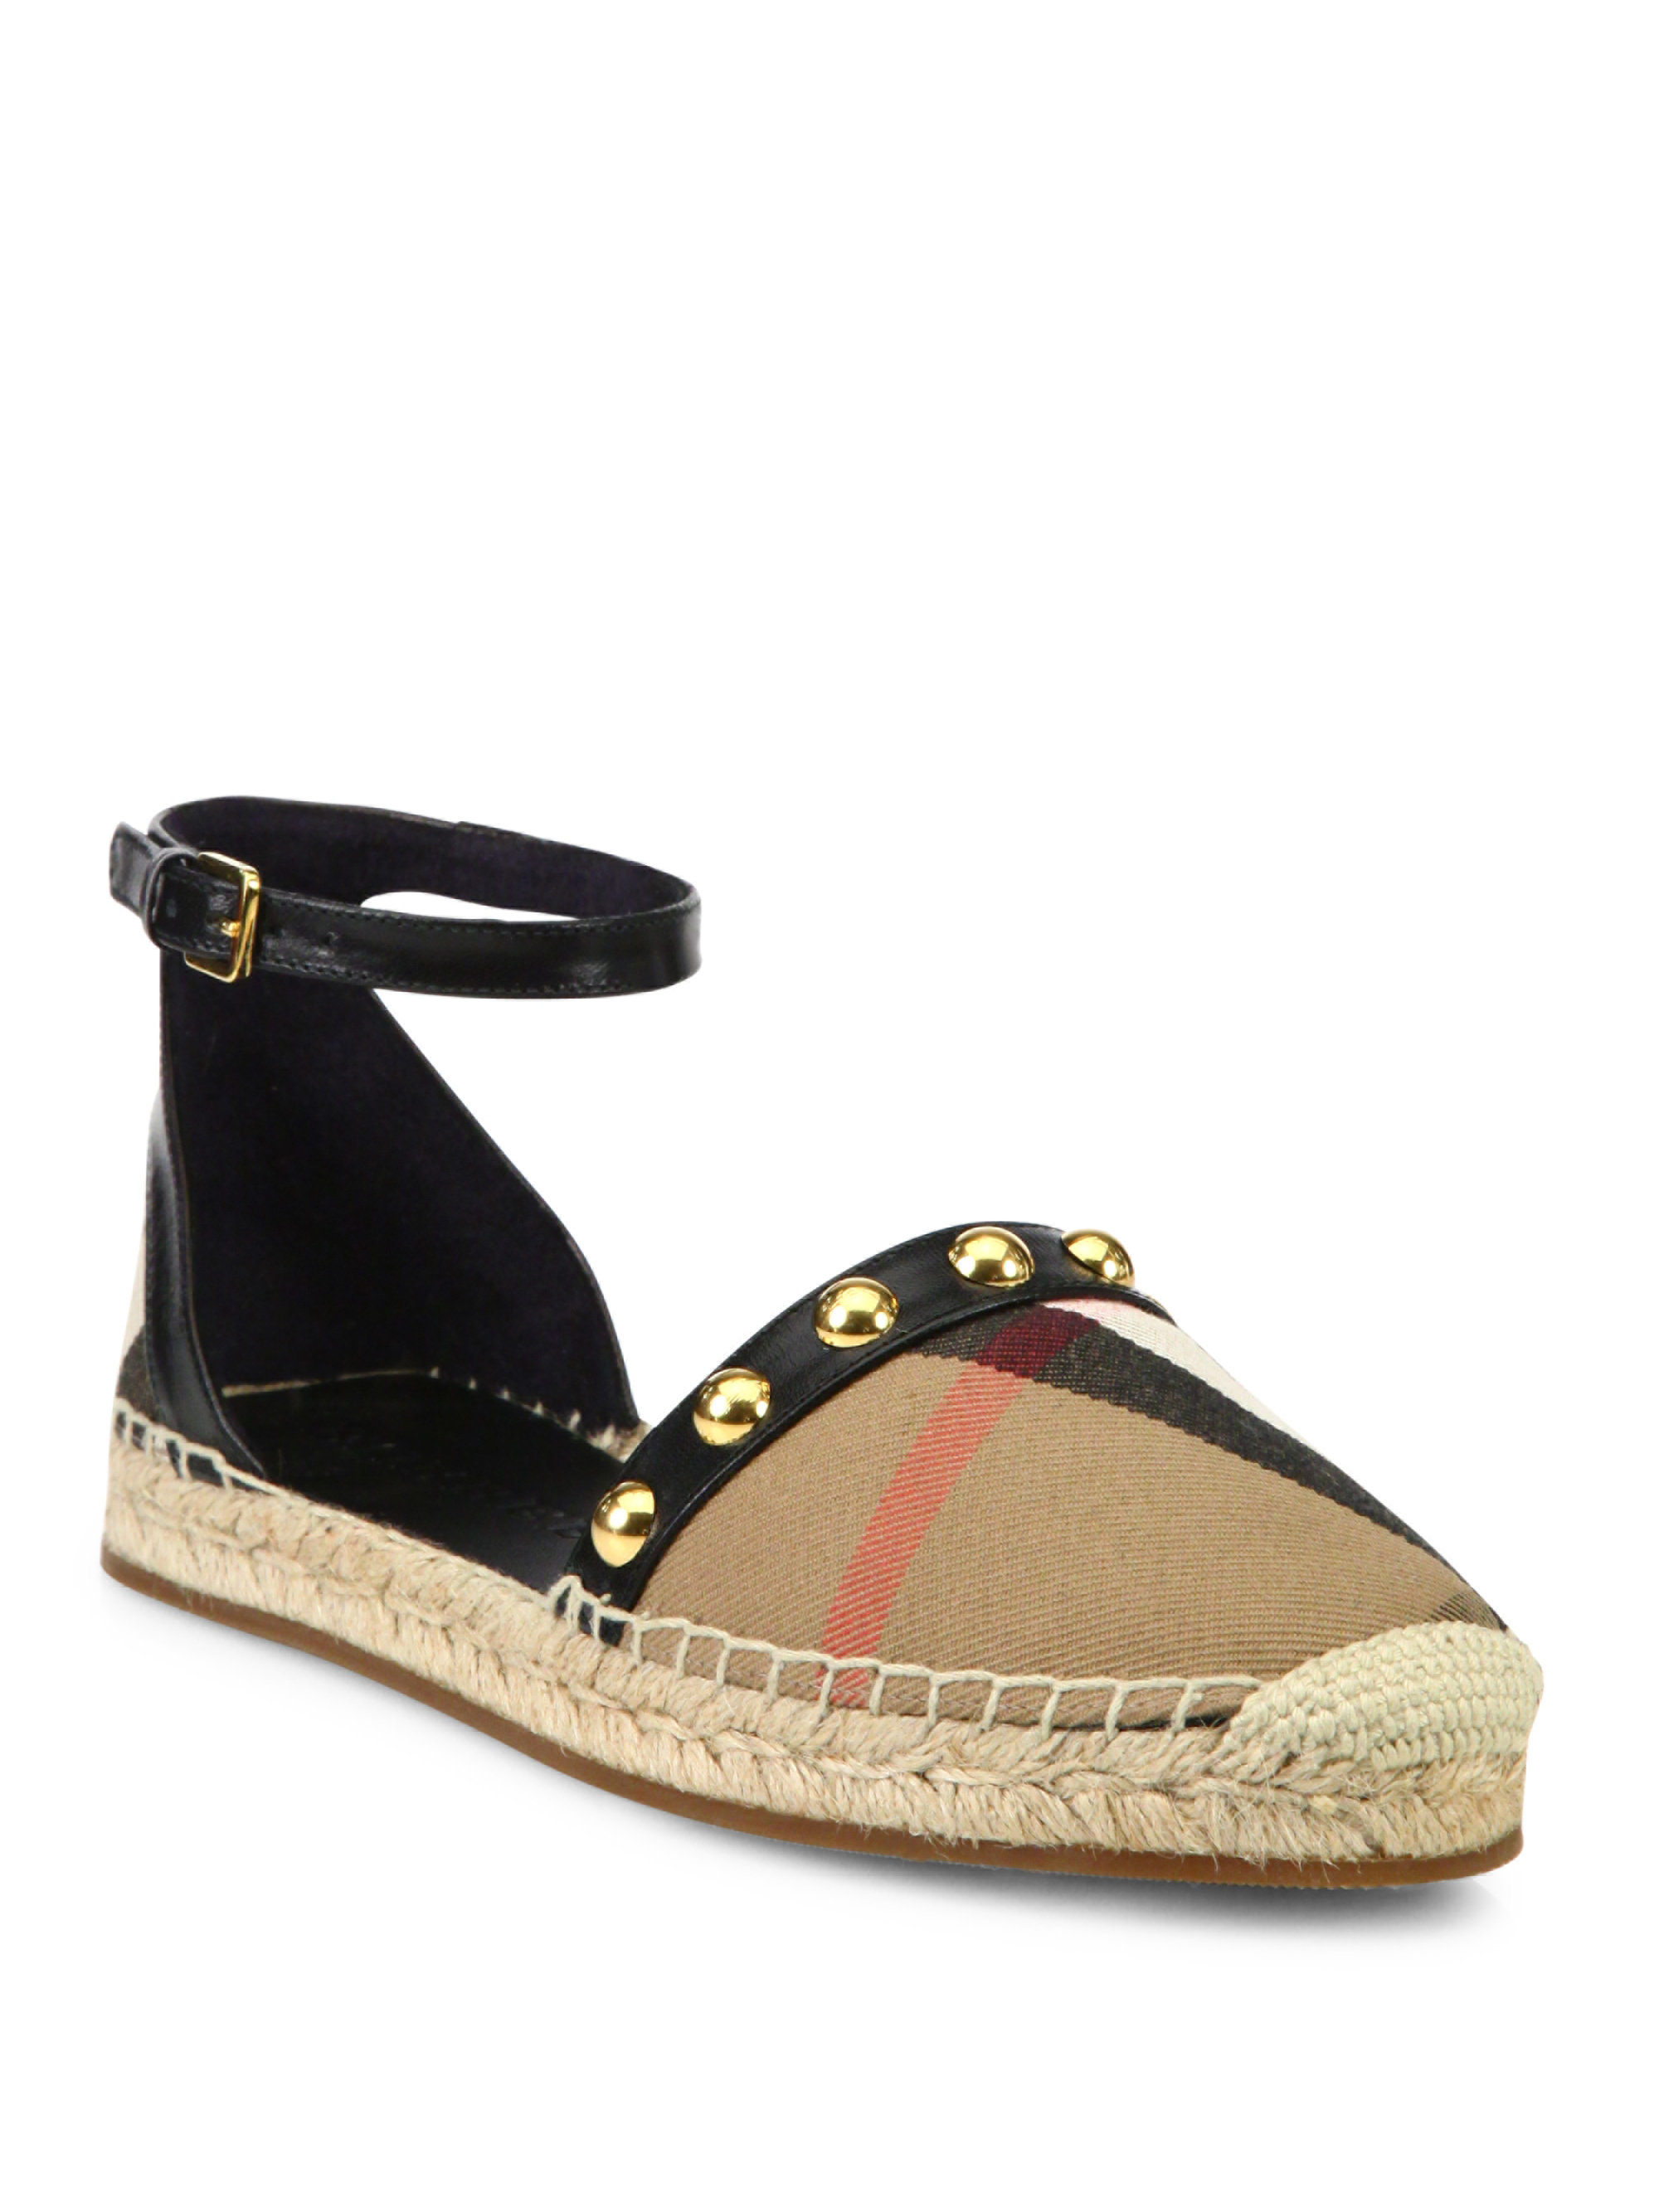 Boho Chic: Burberry Espadrilles with Ankle Straps